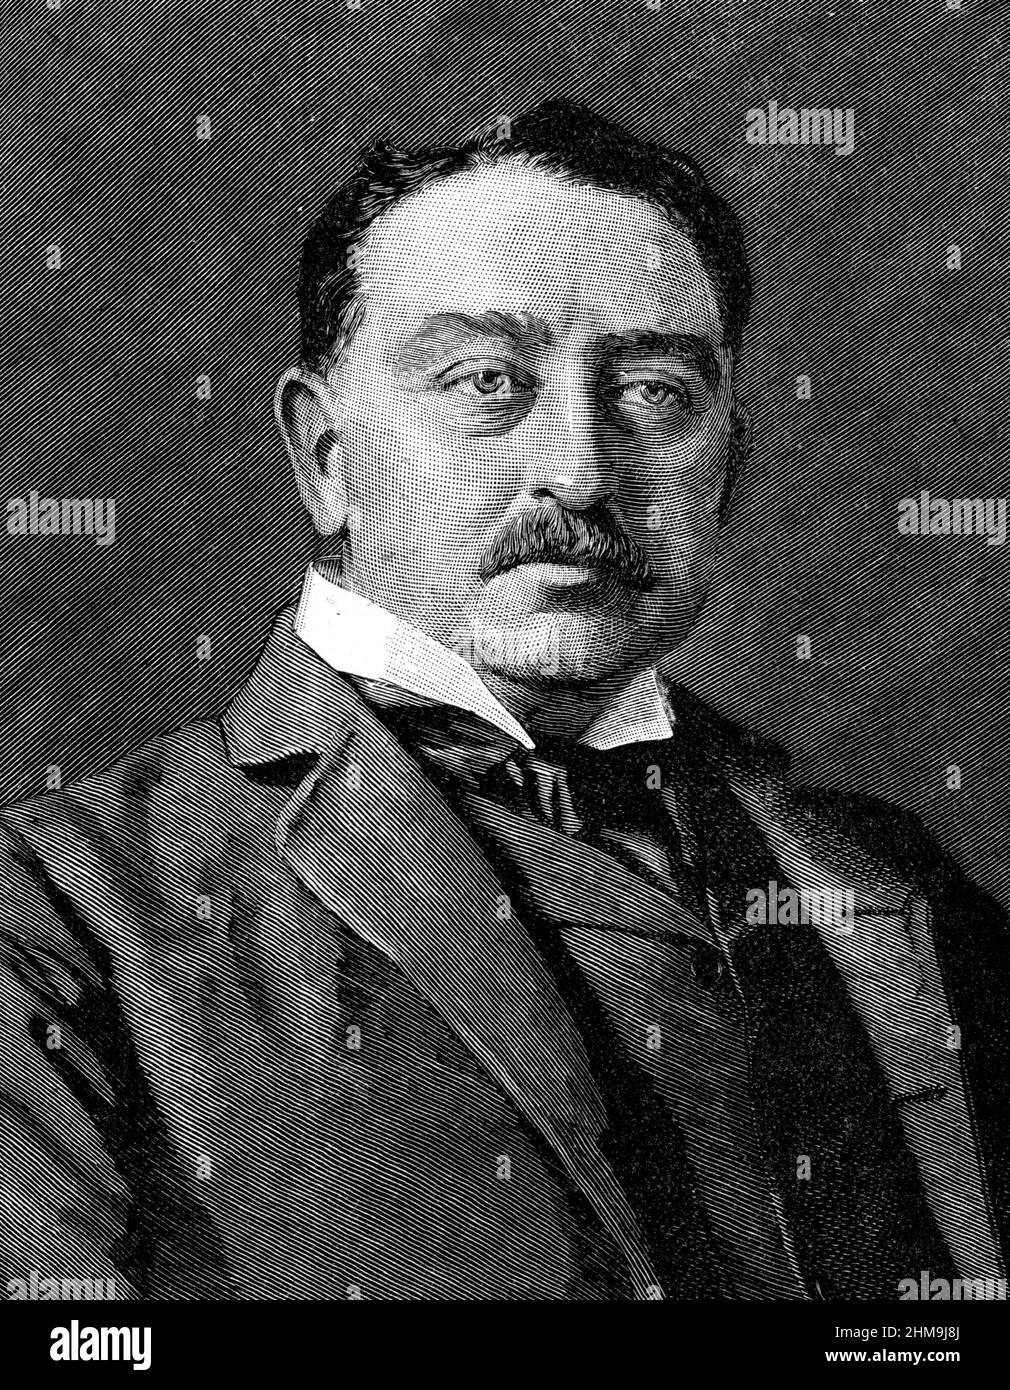 Black & White Illustration; Portrait of Cecil Rhodes, British mining magnate & politician in Southern Africa UK Prime Minister of the Cape Colony Stock Photo